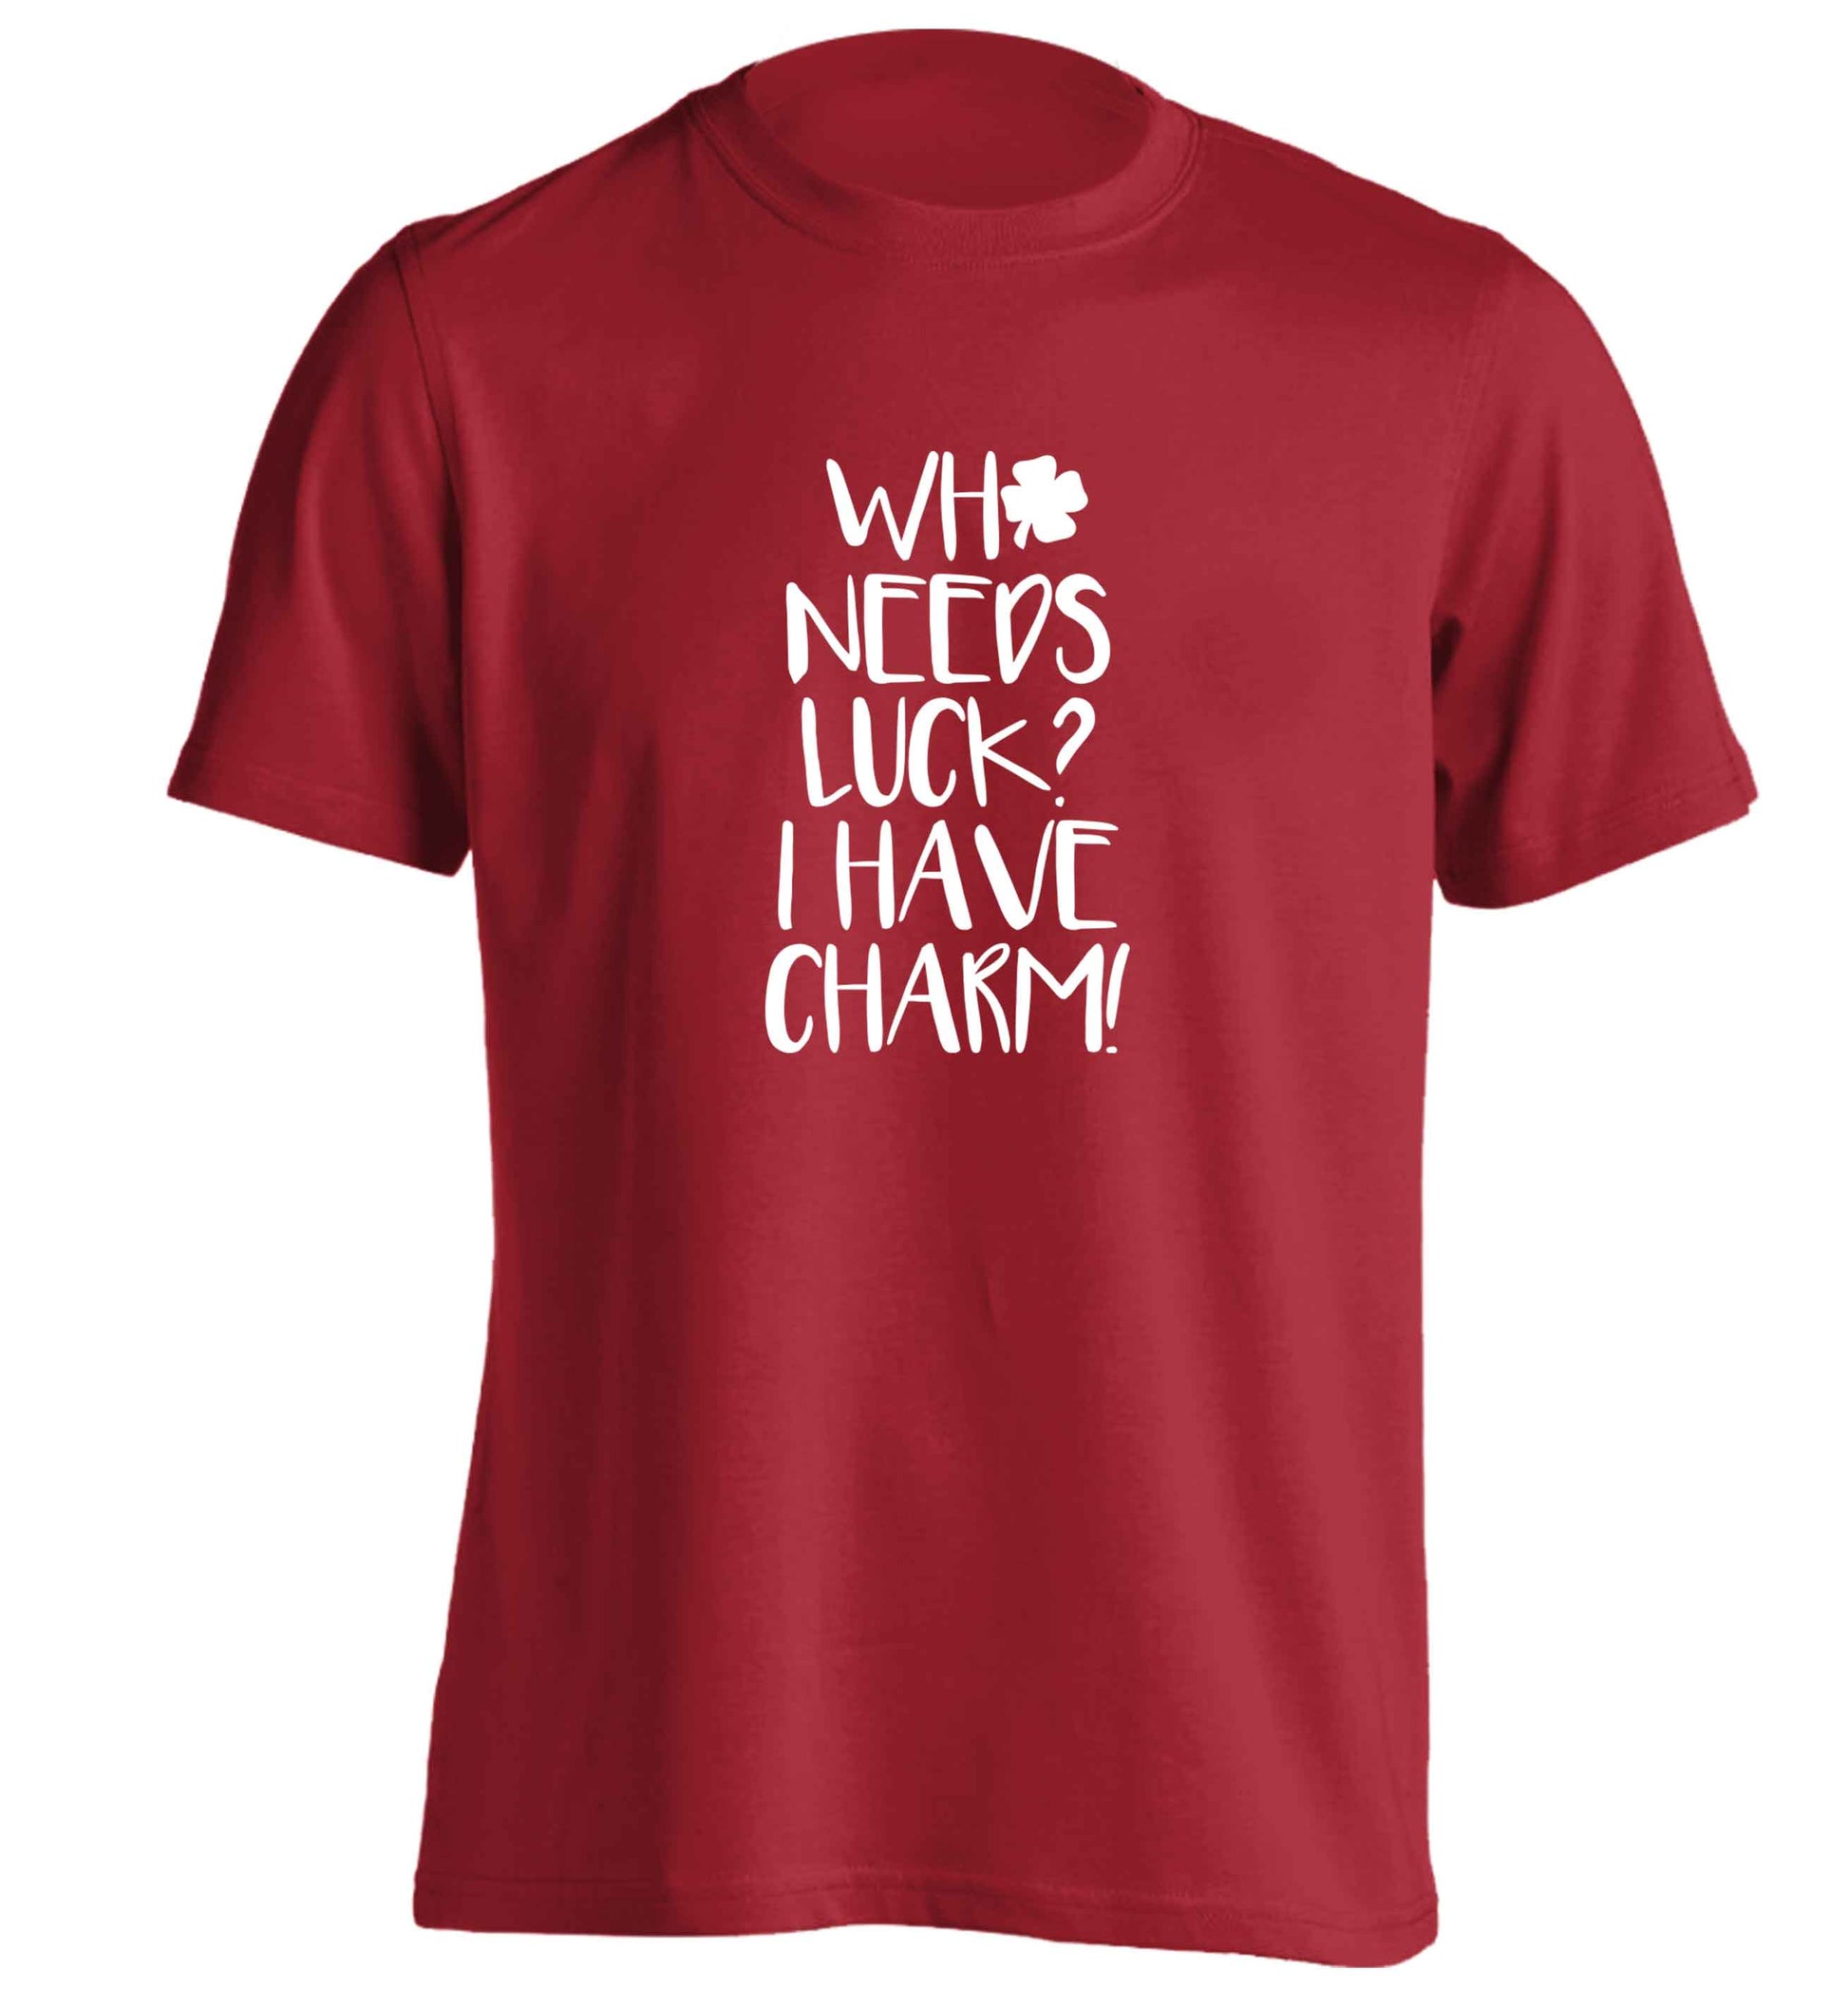 Who needs luck? I have charm! adults unisex red Tshirt 2XL